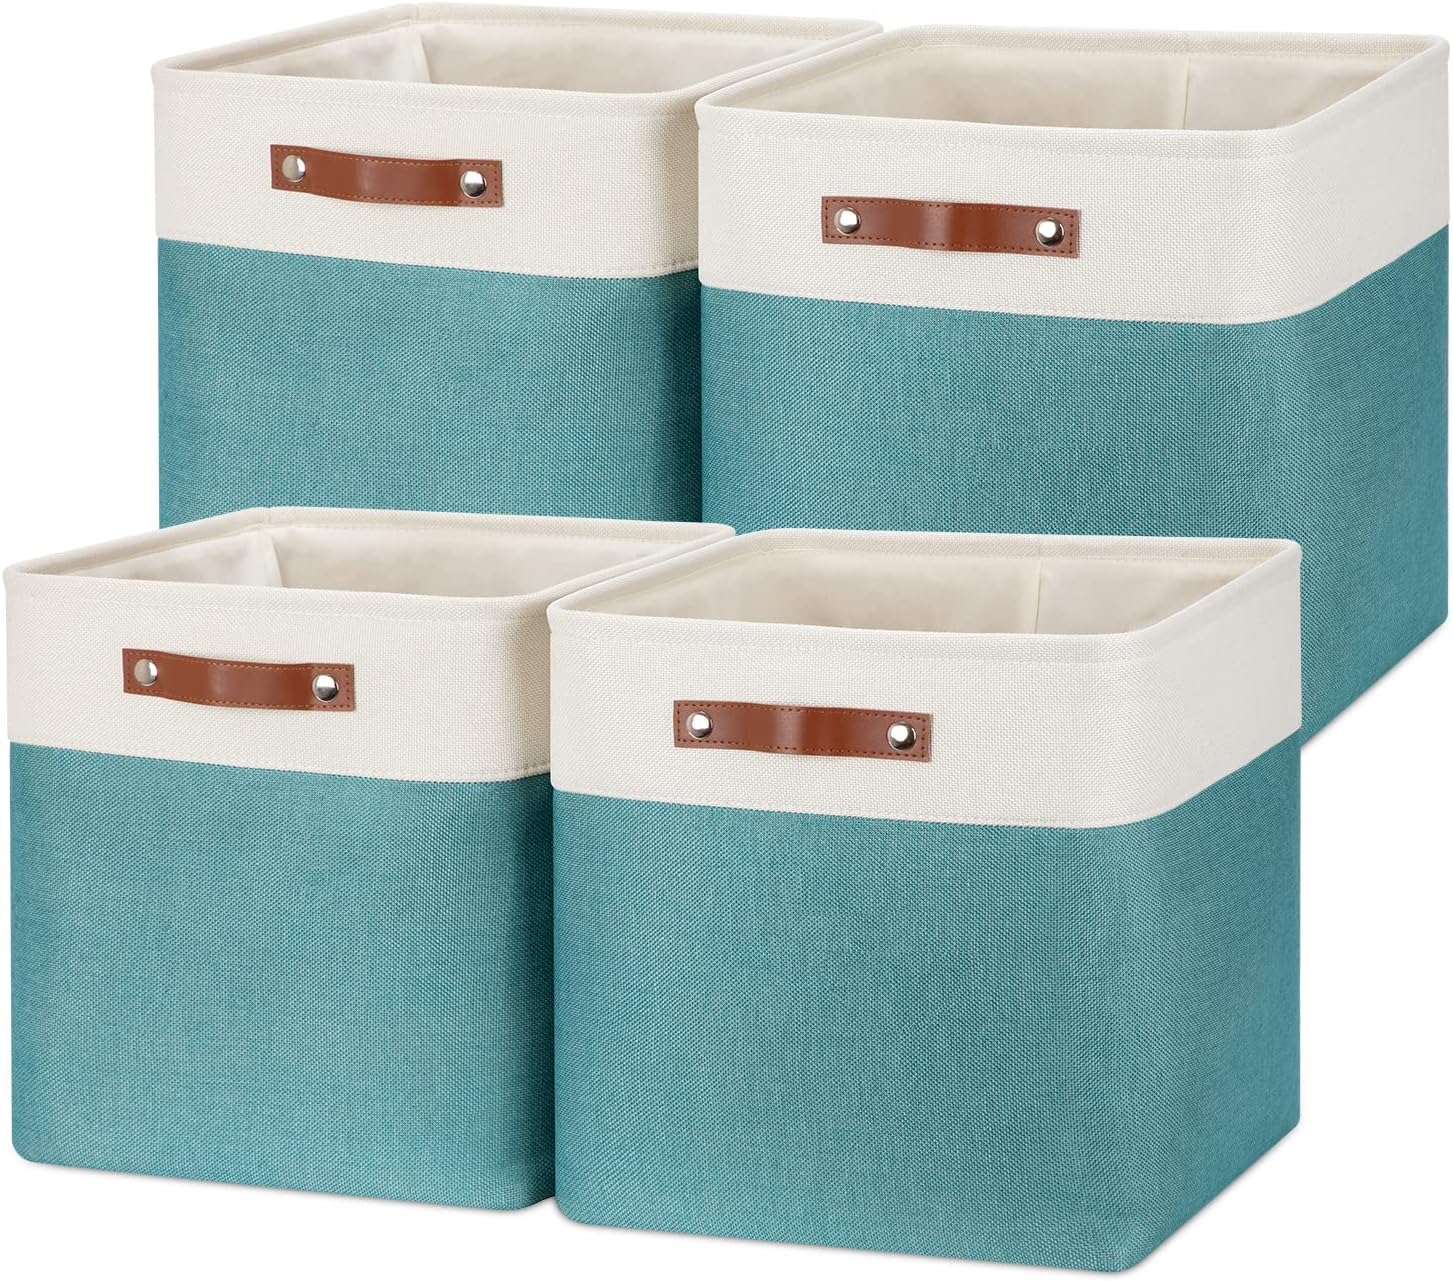 Temary Fabric Storage Cubes 13x13 Storage Baskets for Organizing, 4Pack Large Fabric Storage Bins with Handles Cube Storage Baskets for Storage Clothes, Toys, Books (White&Teal)